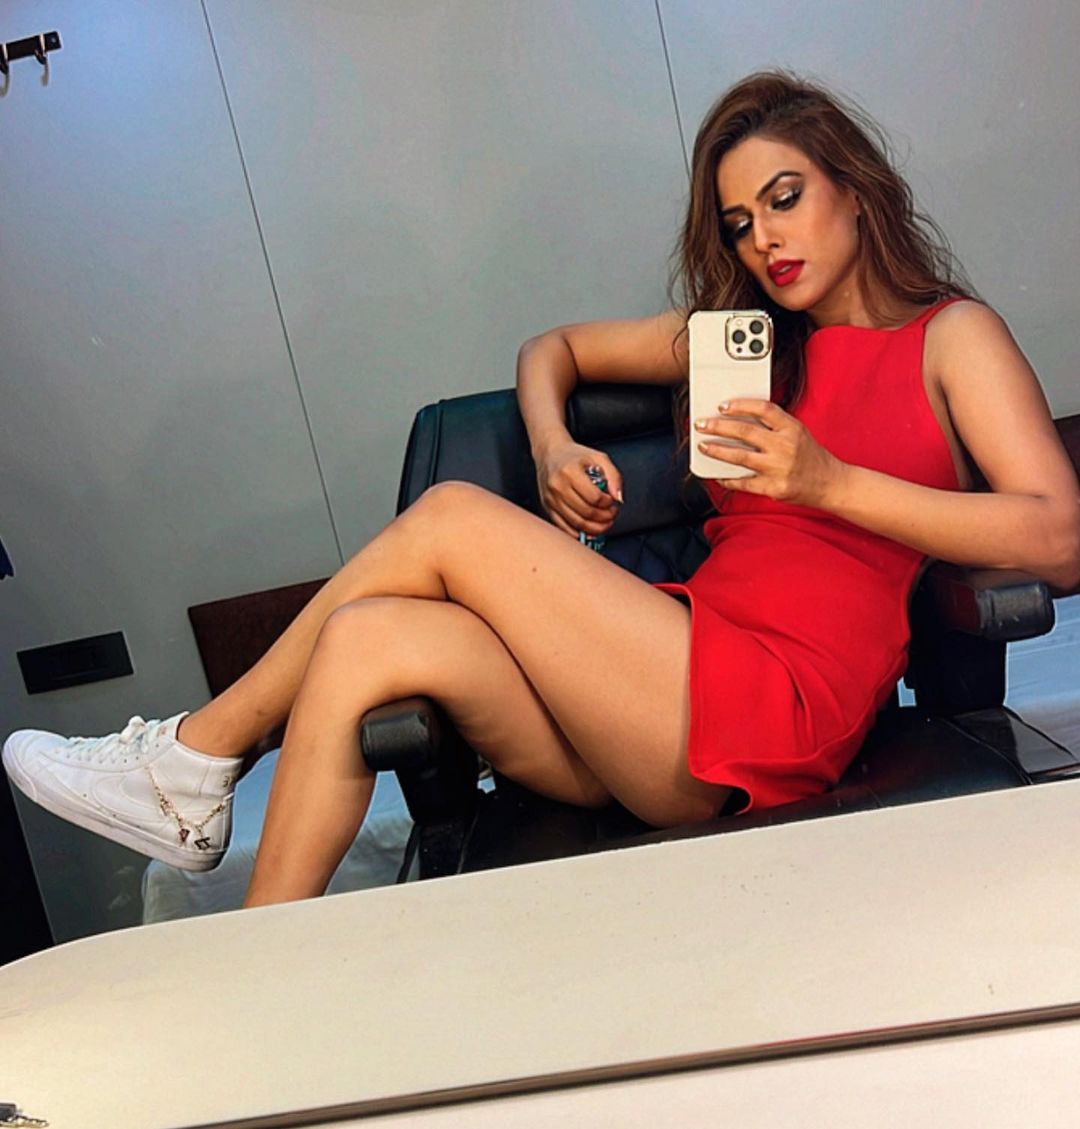 Nia Sharma looks sexy in the little red dress